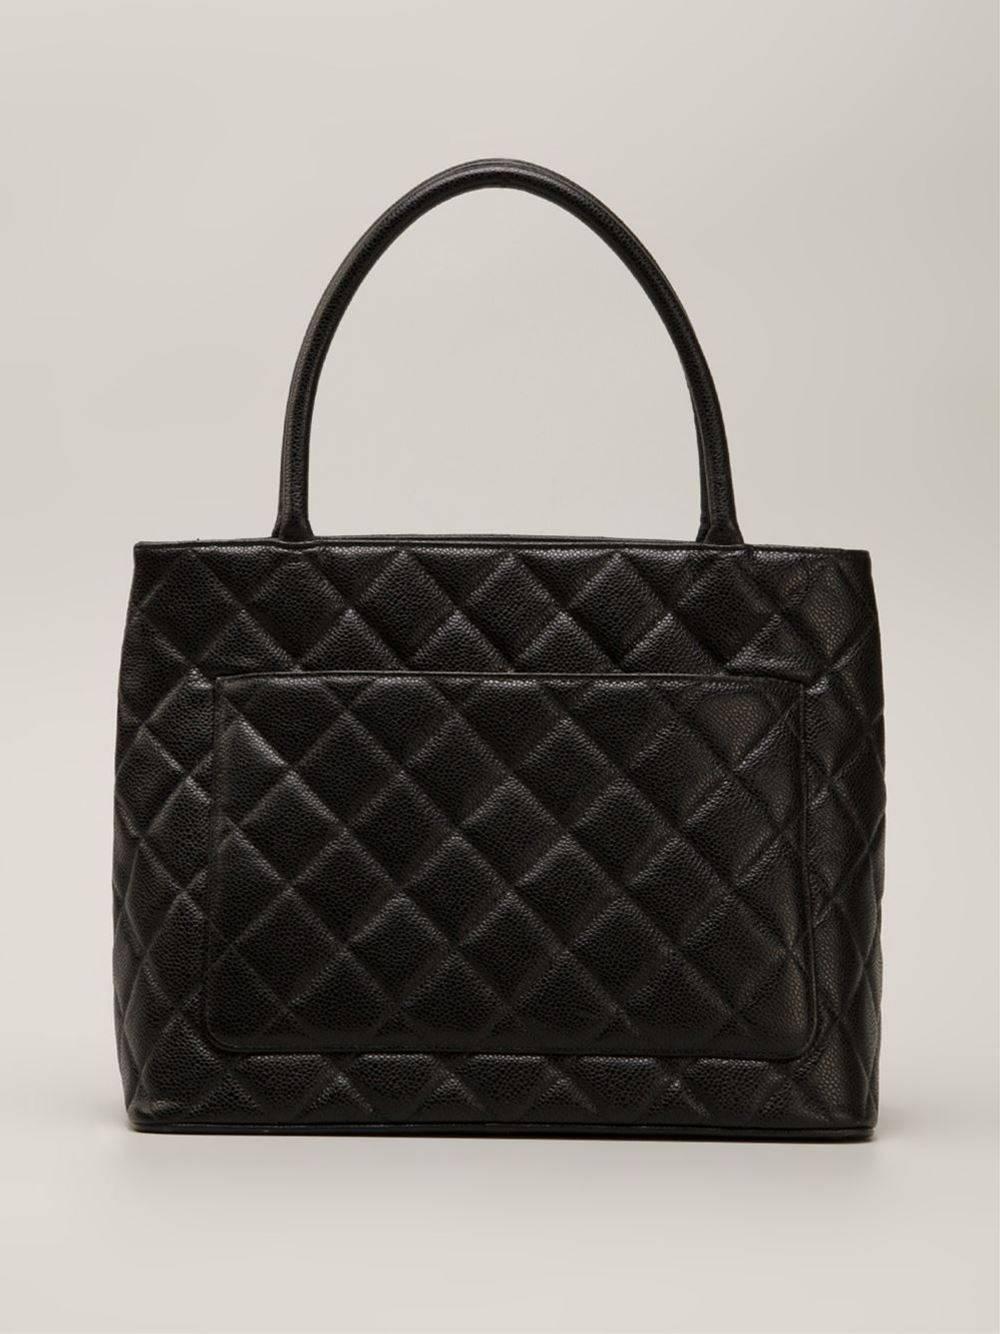 CHANEL Black Quilted Caviar Leather CC Medallion Tote Bag 1